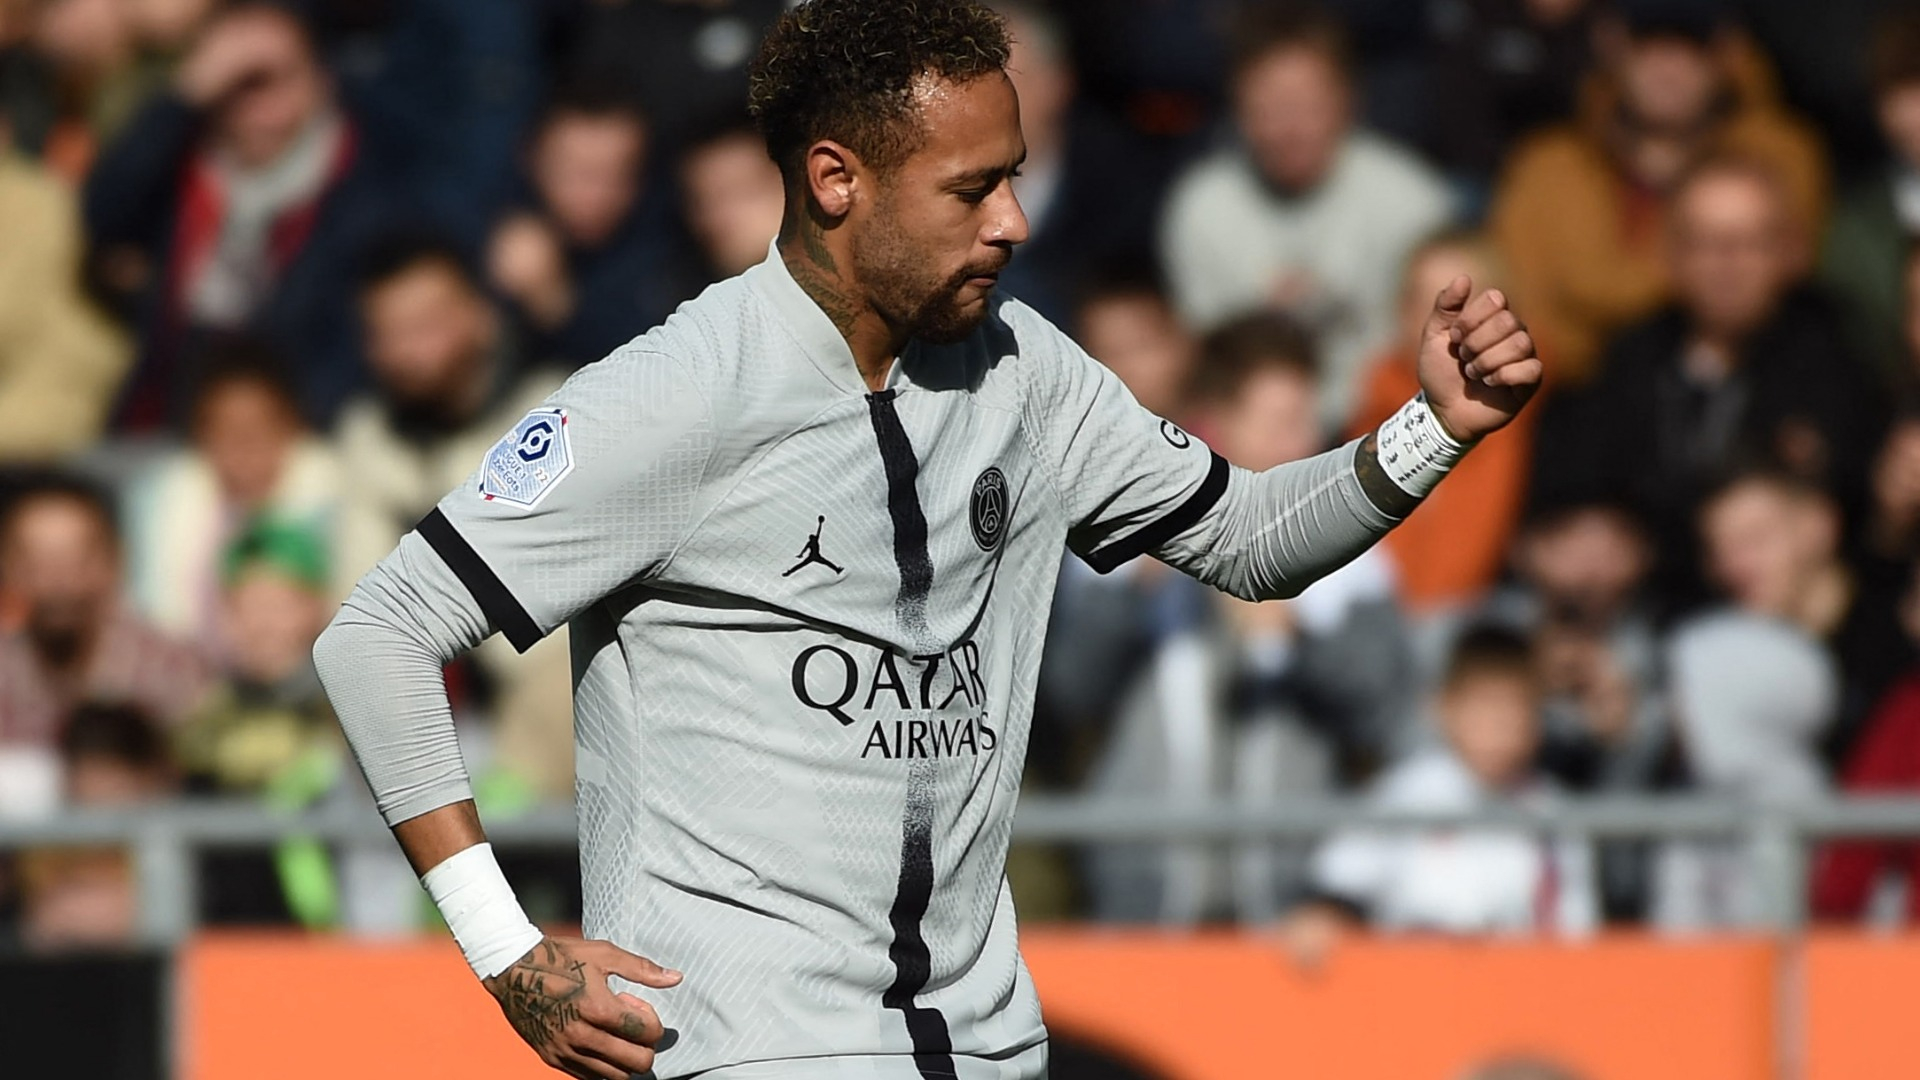 Neymar to Newcastle? Report Reveals the Major Hurdle for Transfer